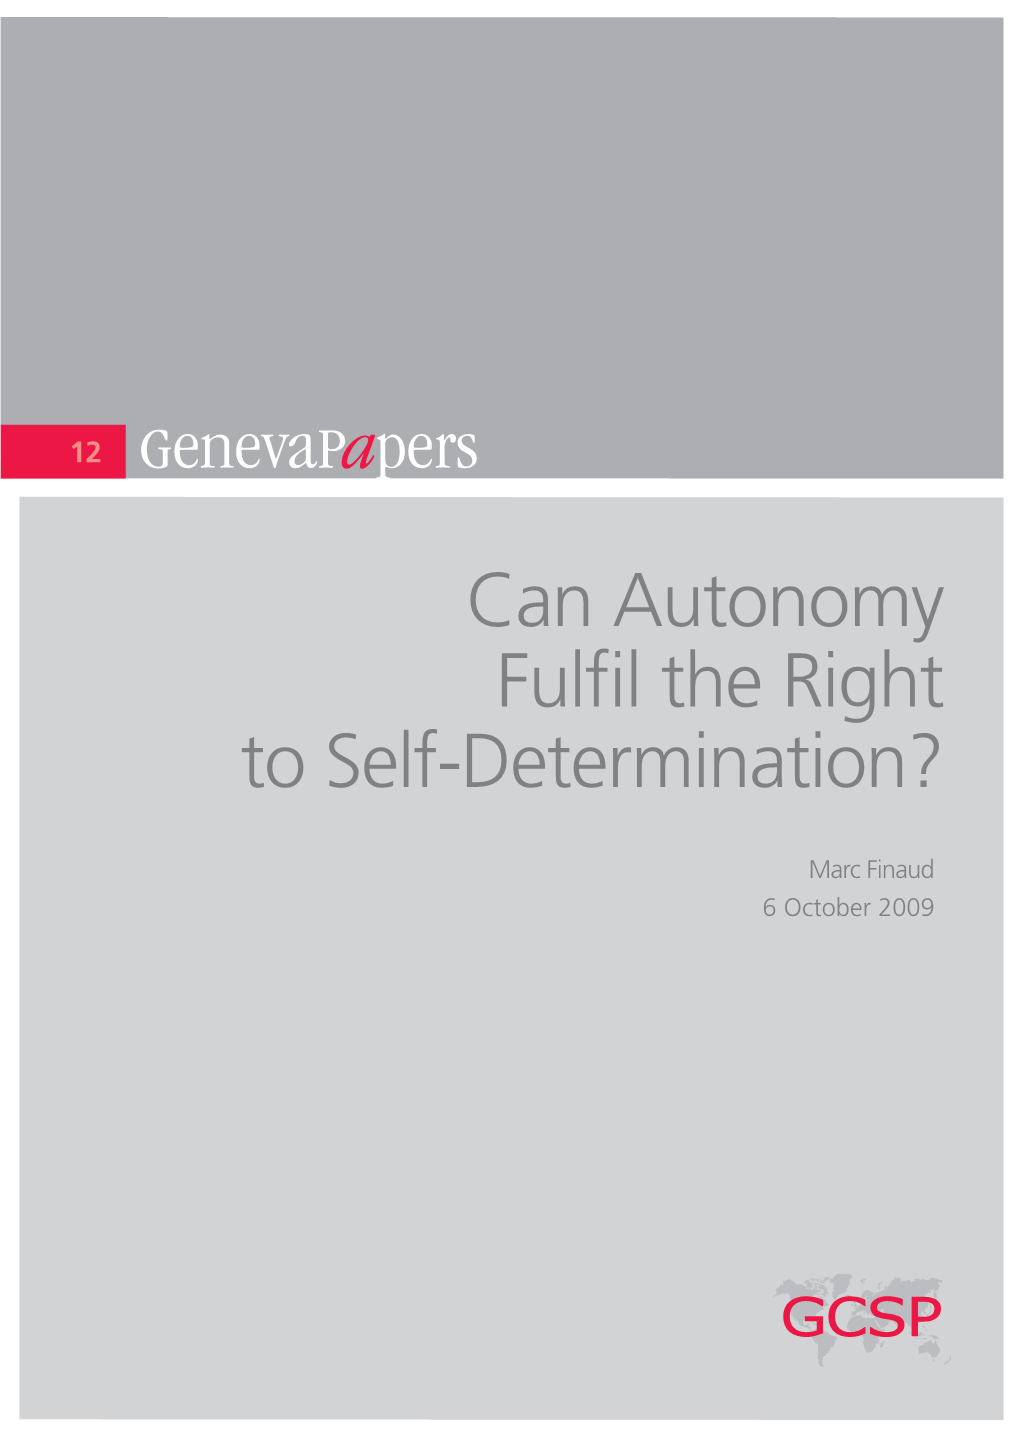 Can Autonomy Fulfil the Right to Self-Determination? Can Autonomy Fulfil the Right GCSP Report to Self-Determination?